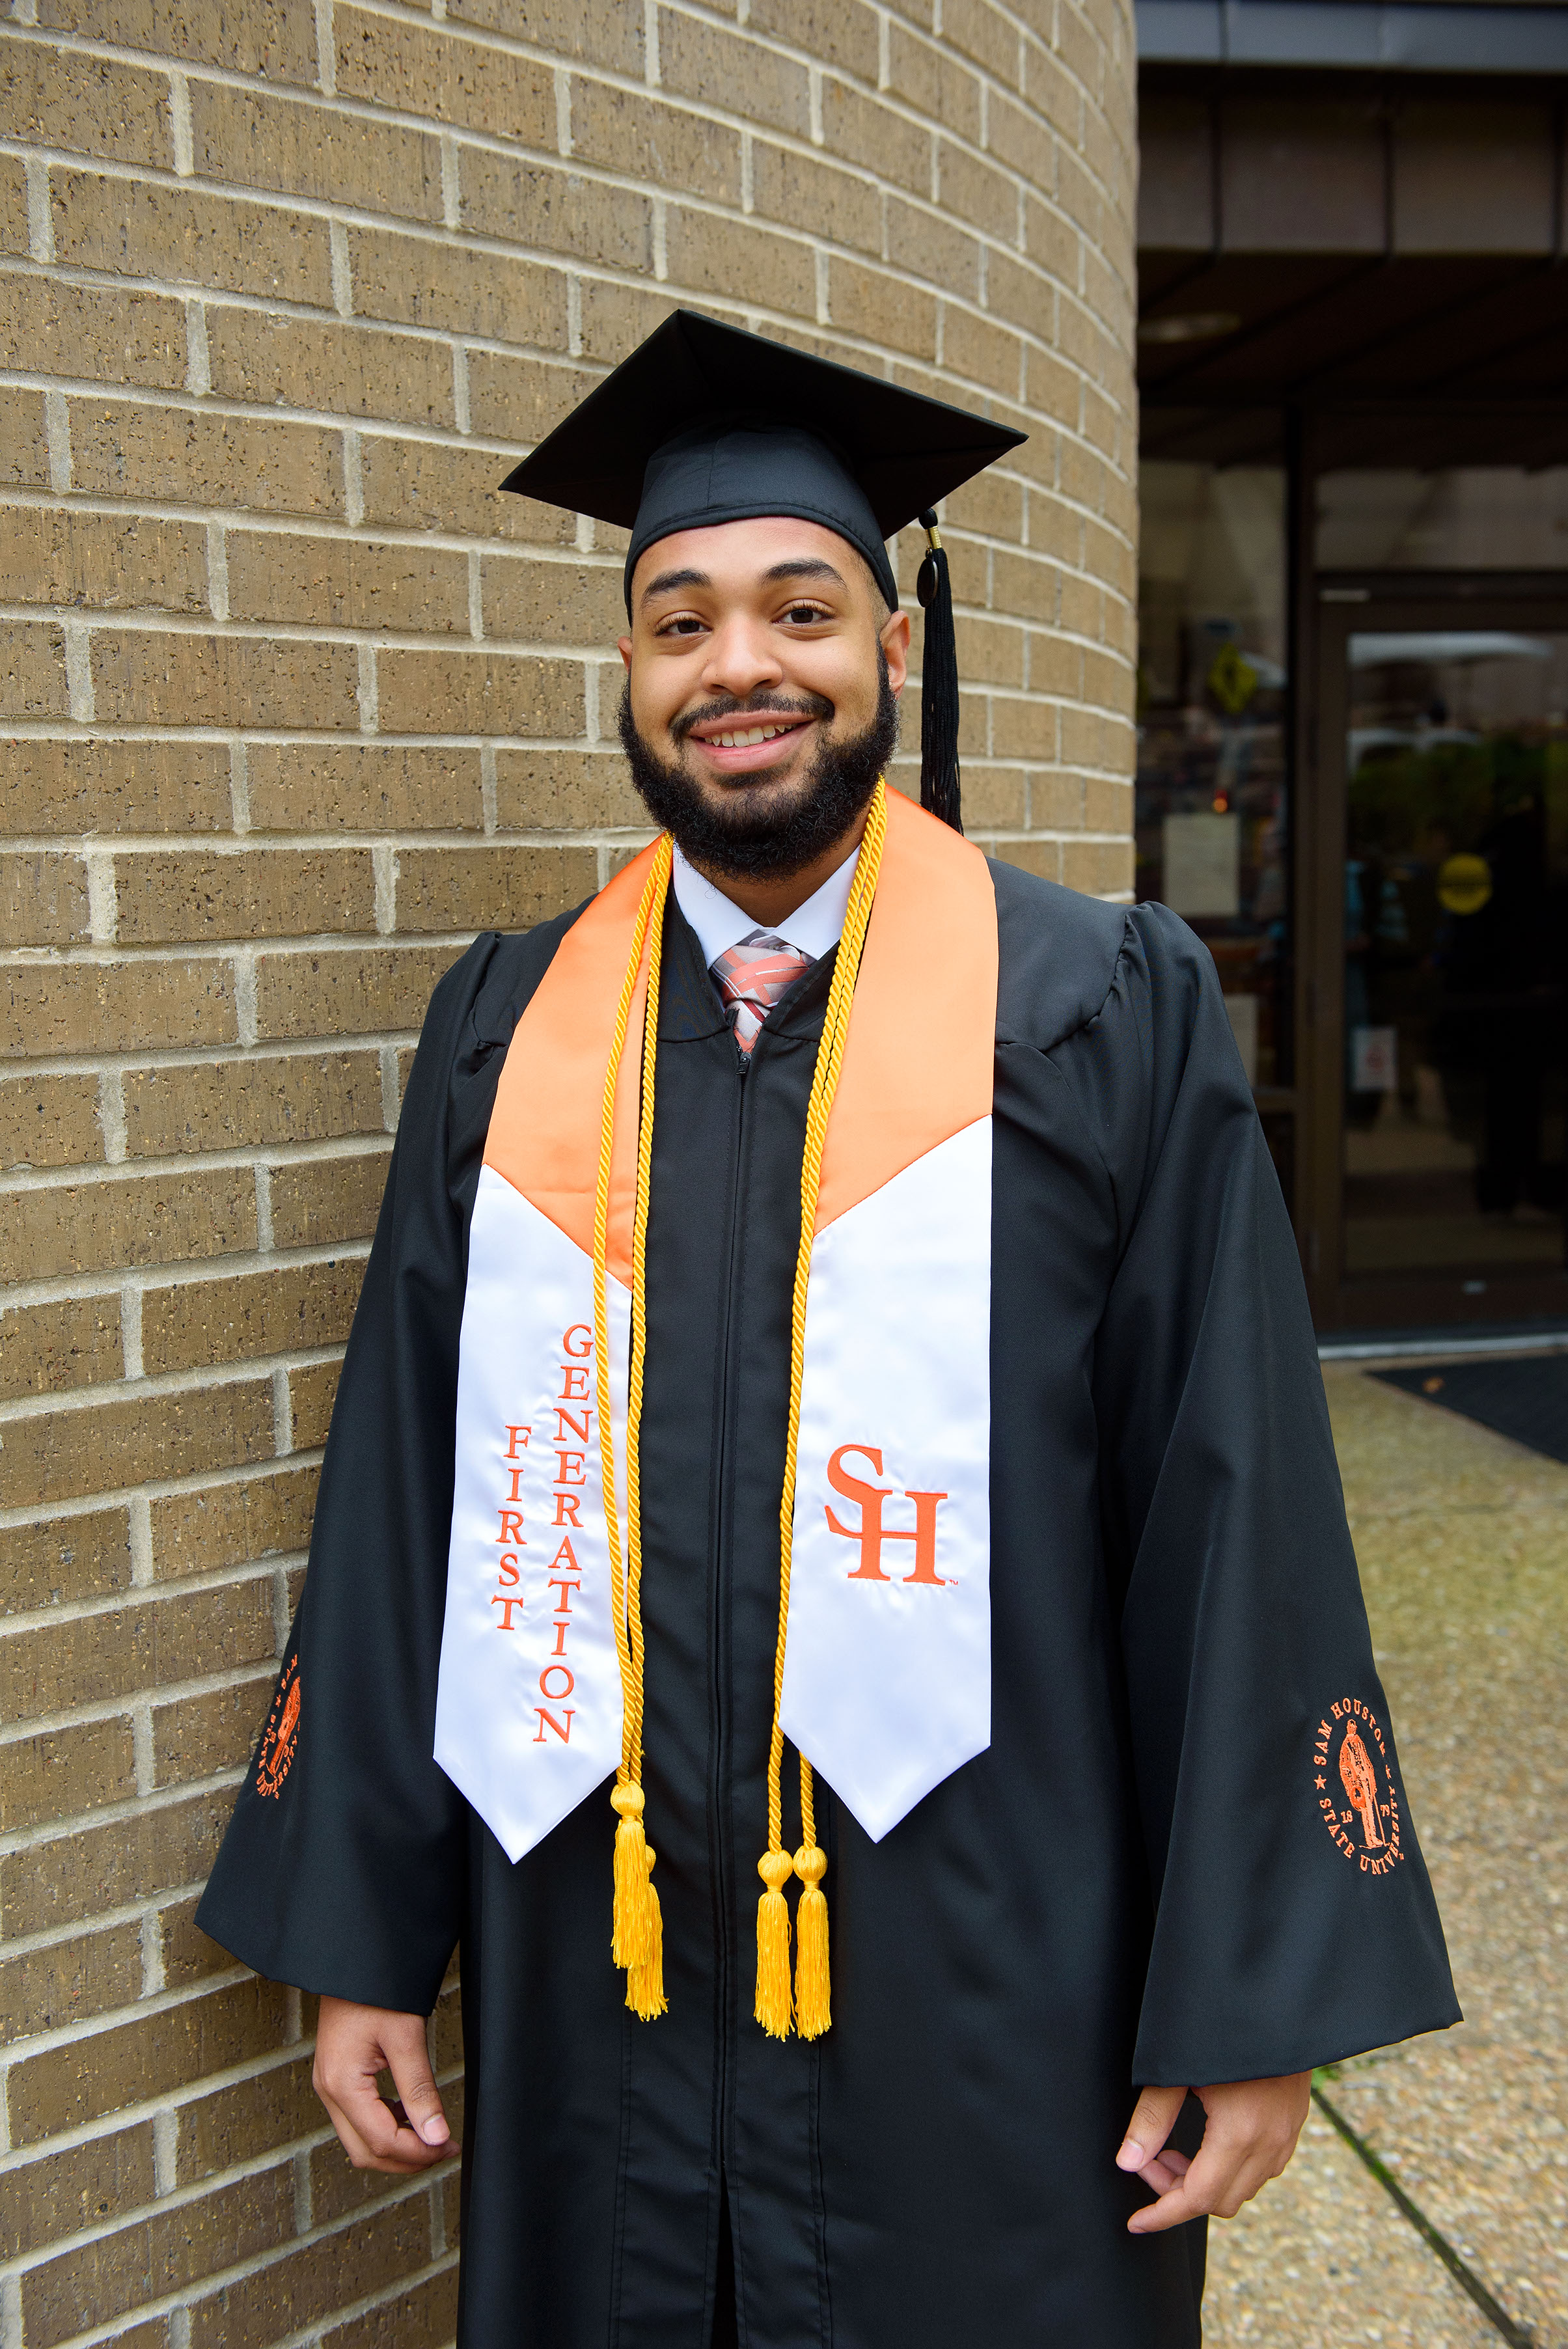 A first-generation graduate poses before his ceremony.